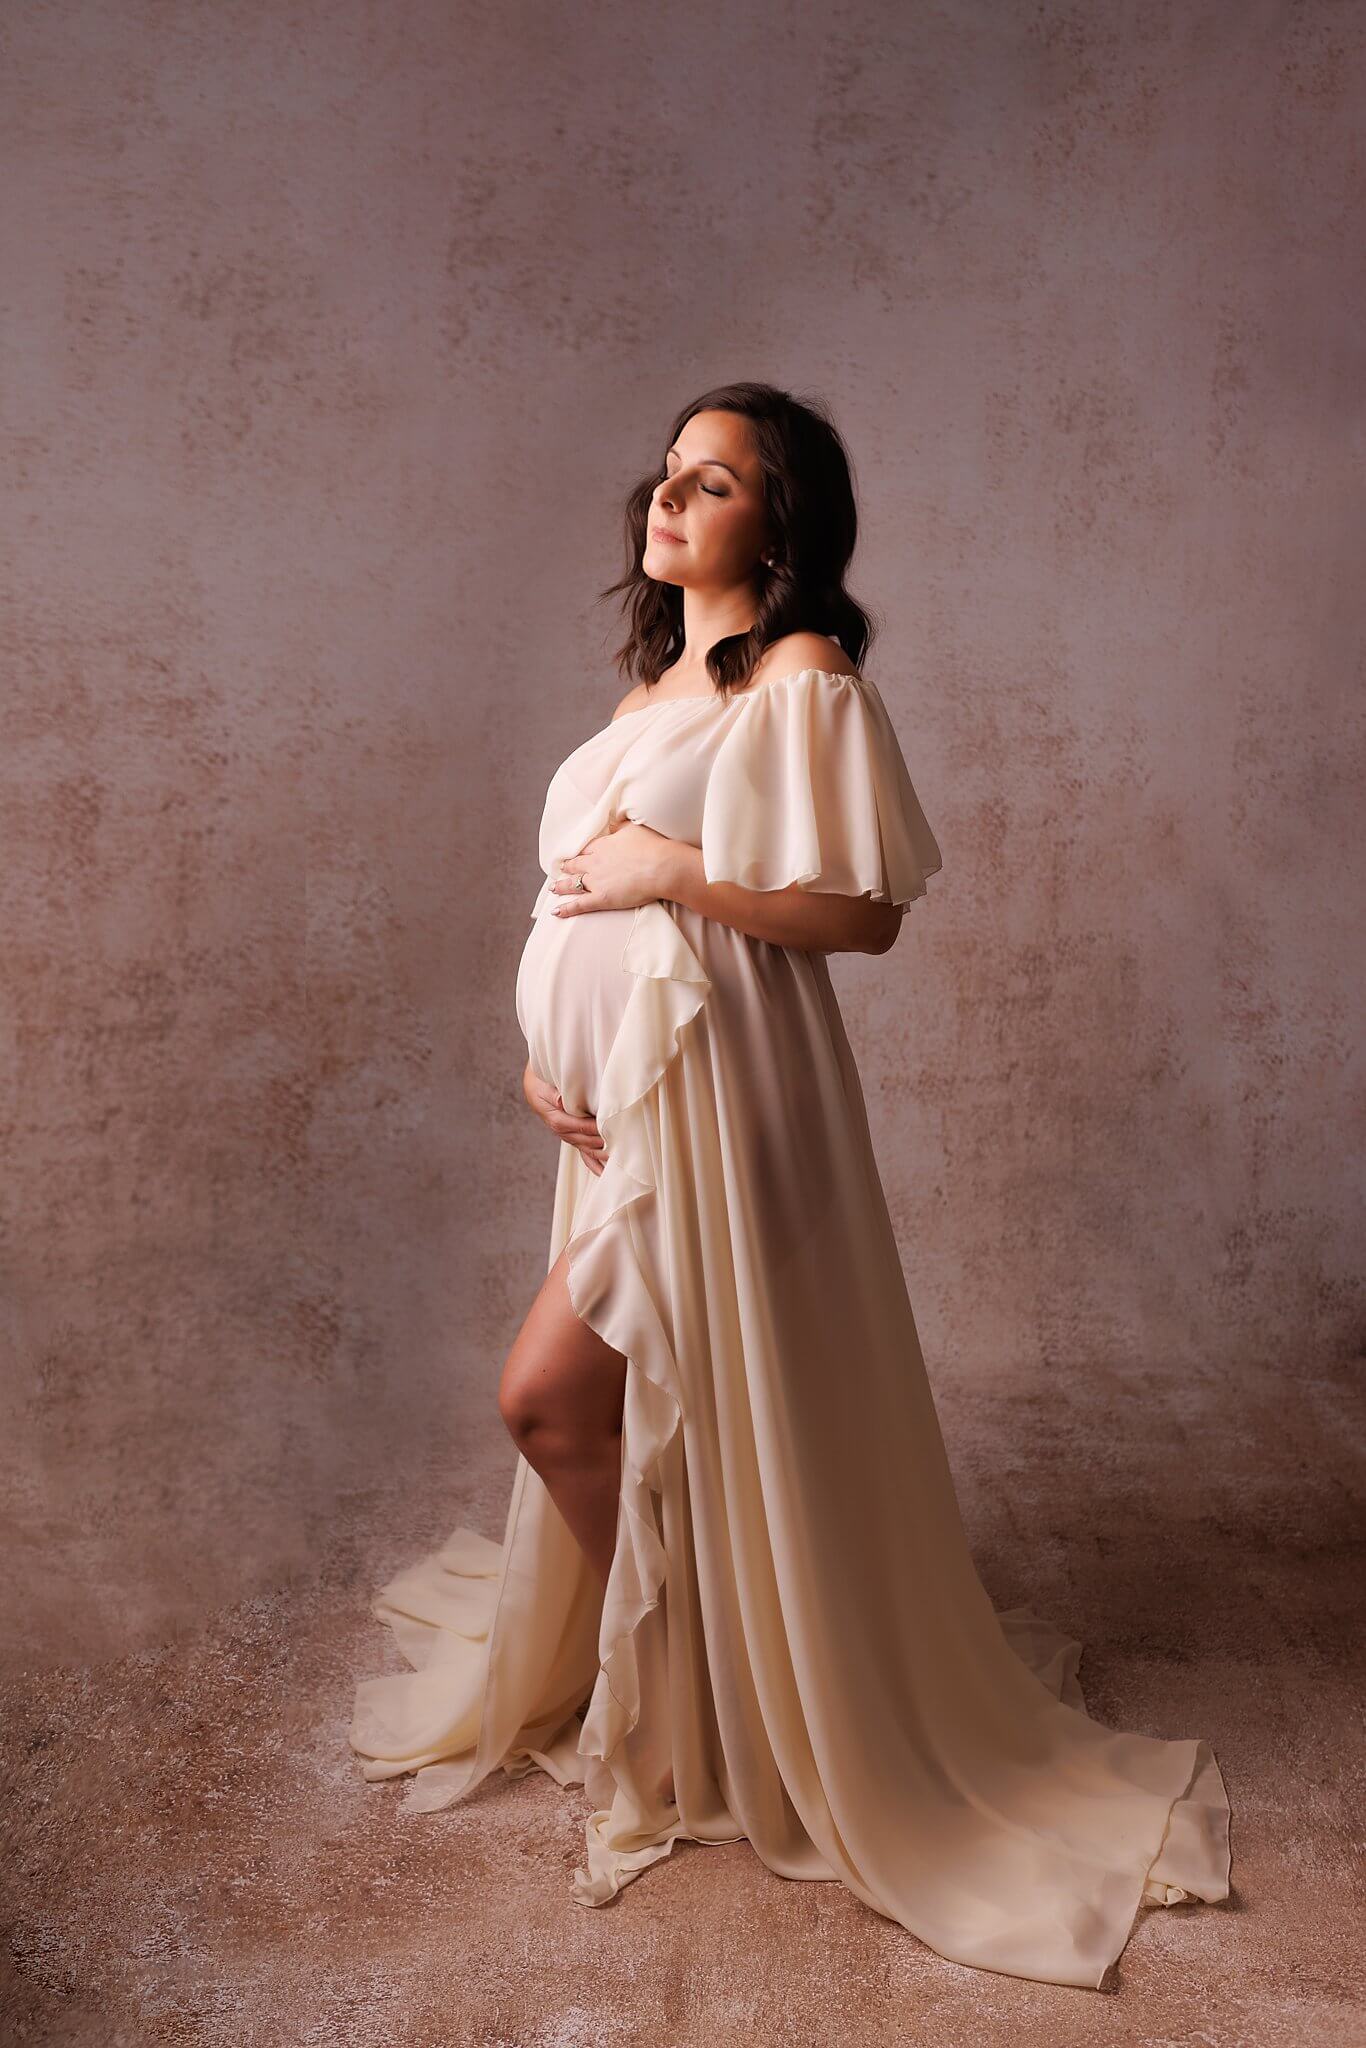 Pregnant woman in an ivory dress on a light backdrop Maternity Photography